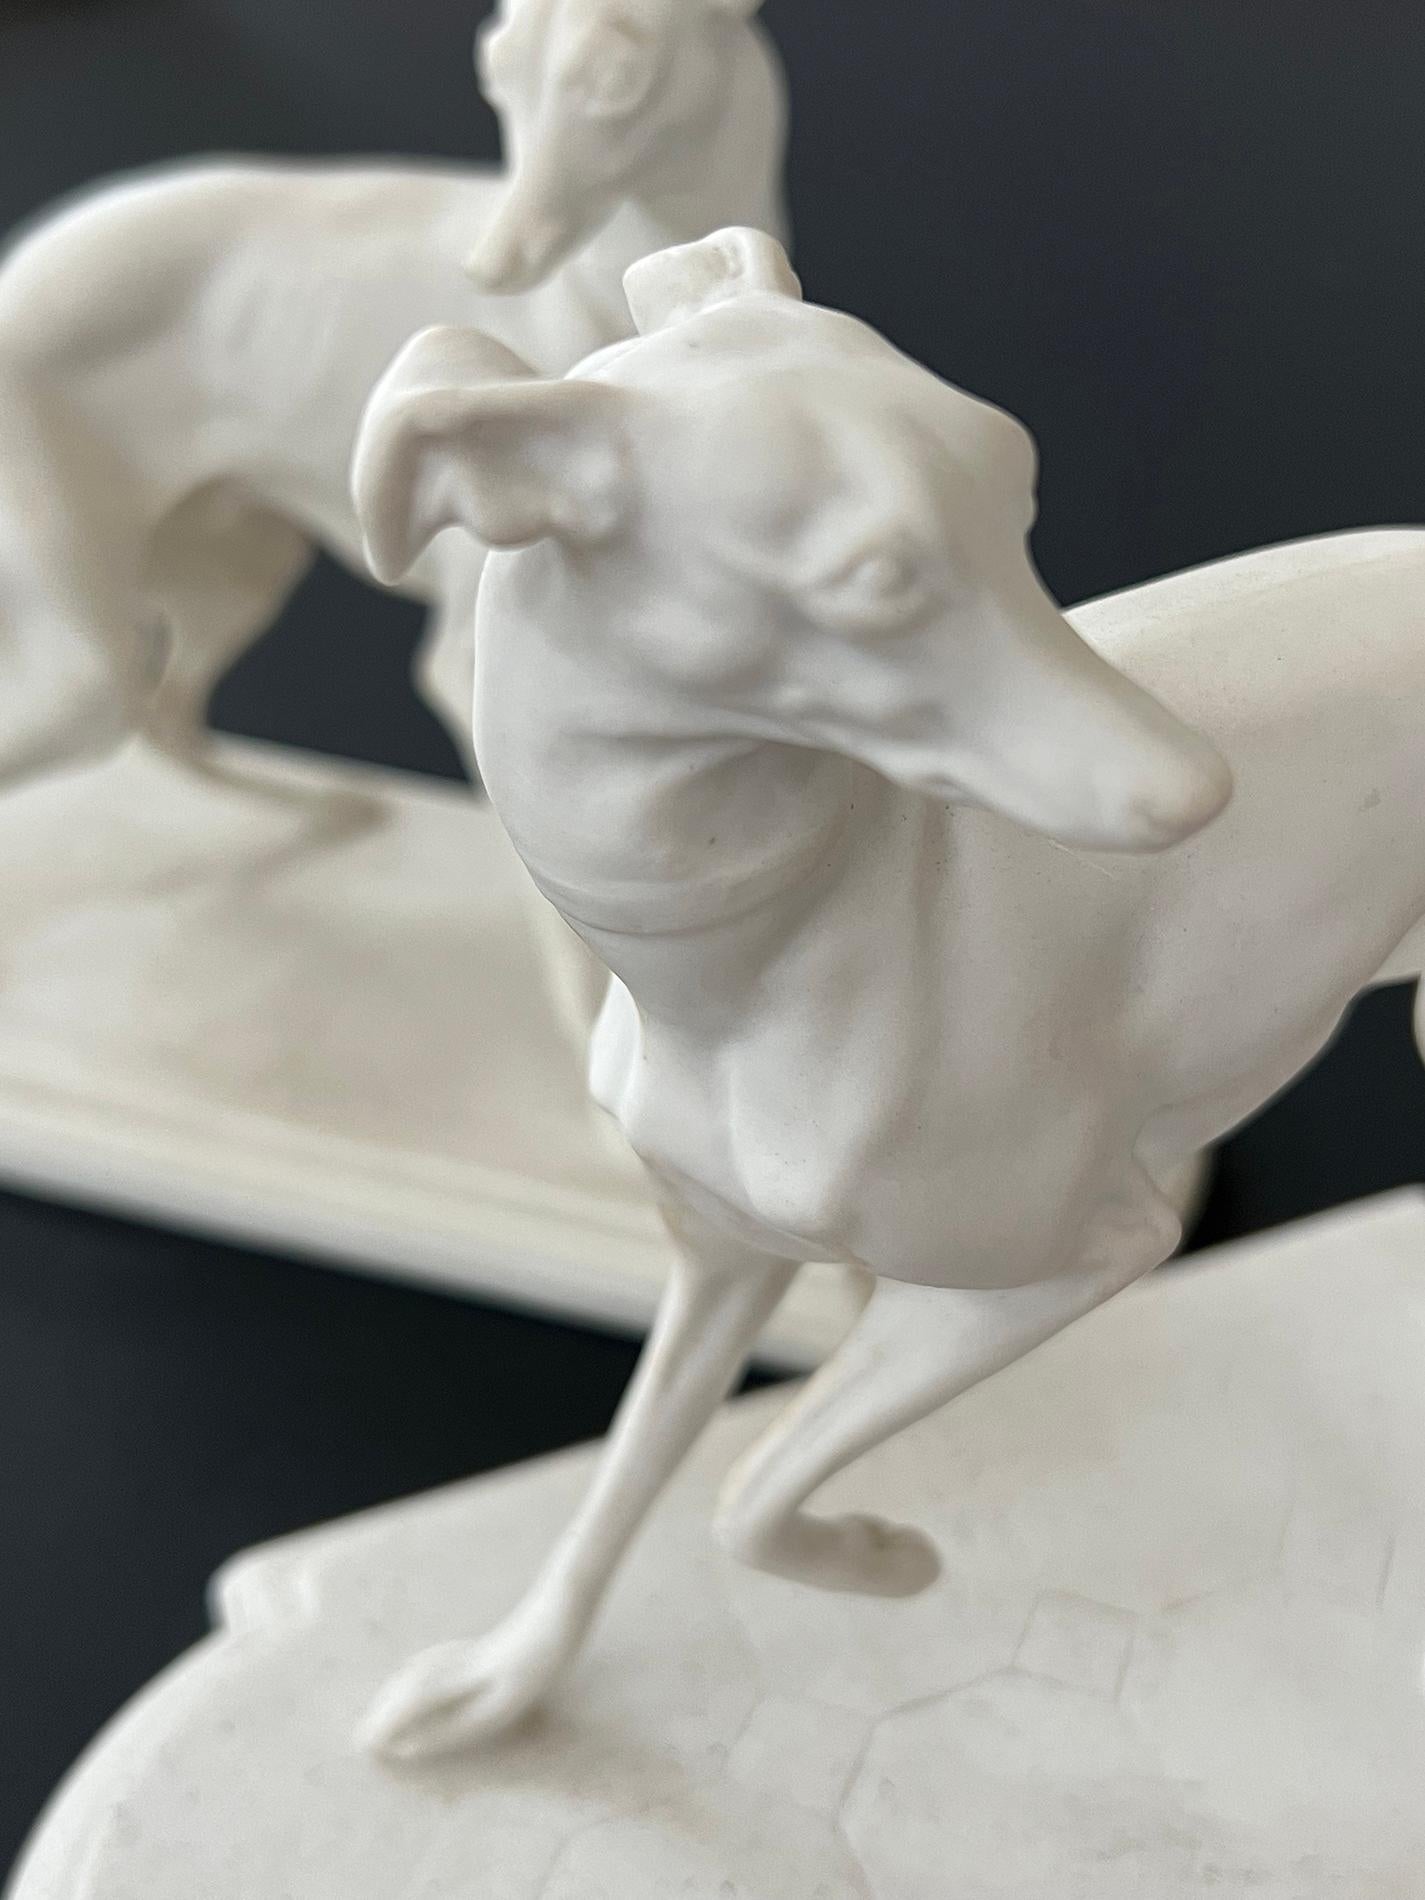 this rare pair of bisque porcelain whippet figurines from Boehm Studios was commissioned by President Dwight Eisenhower in 1954; each unique statue, one male and one female in an alert standing position with heads turned and ears pricked; with